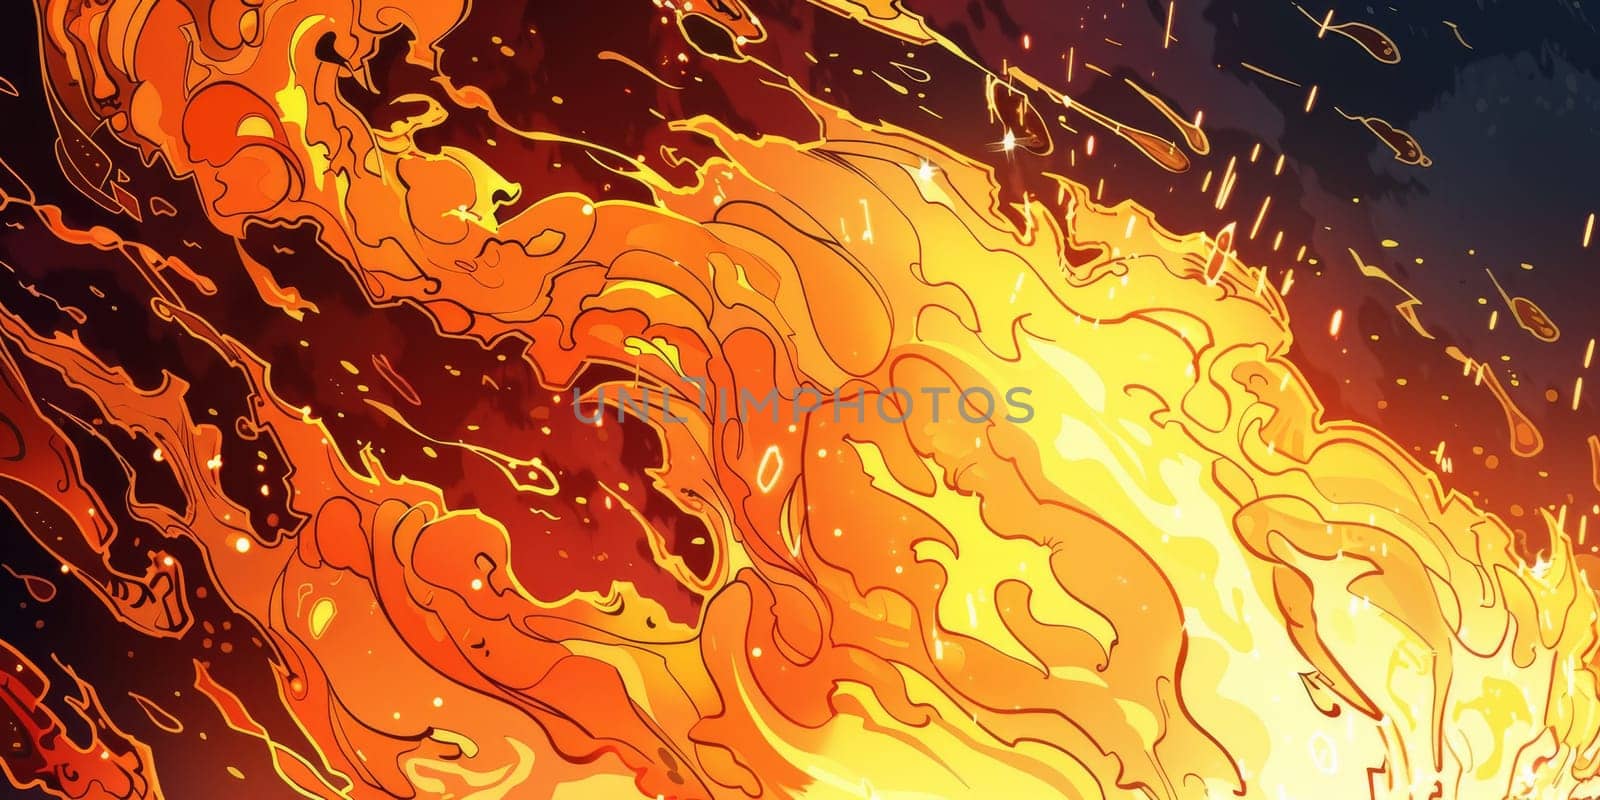 Close-up view of vibrant flames blazing from fire